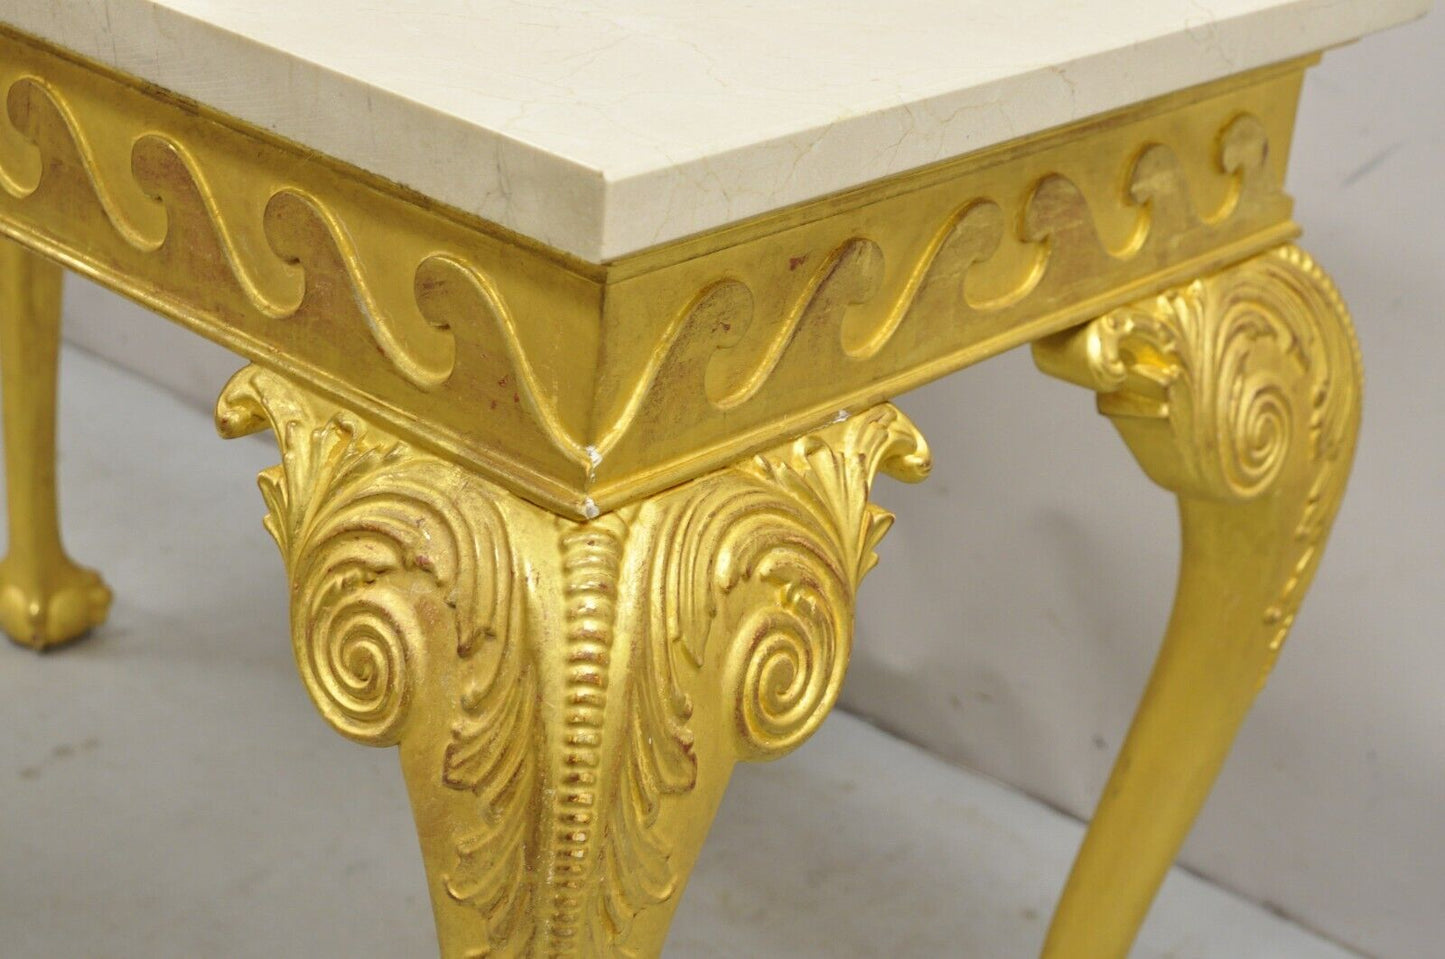 English George II Style Gold Giltwood Ball and Claw Foot Console Hall Table